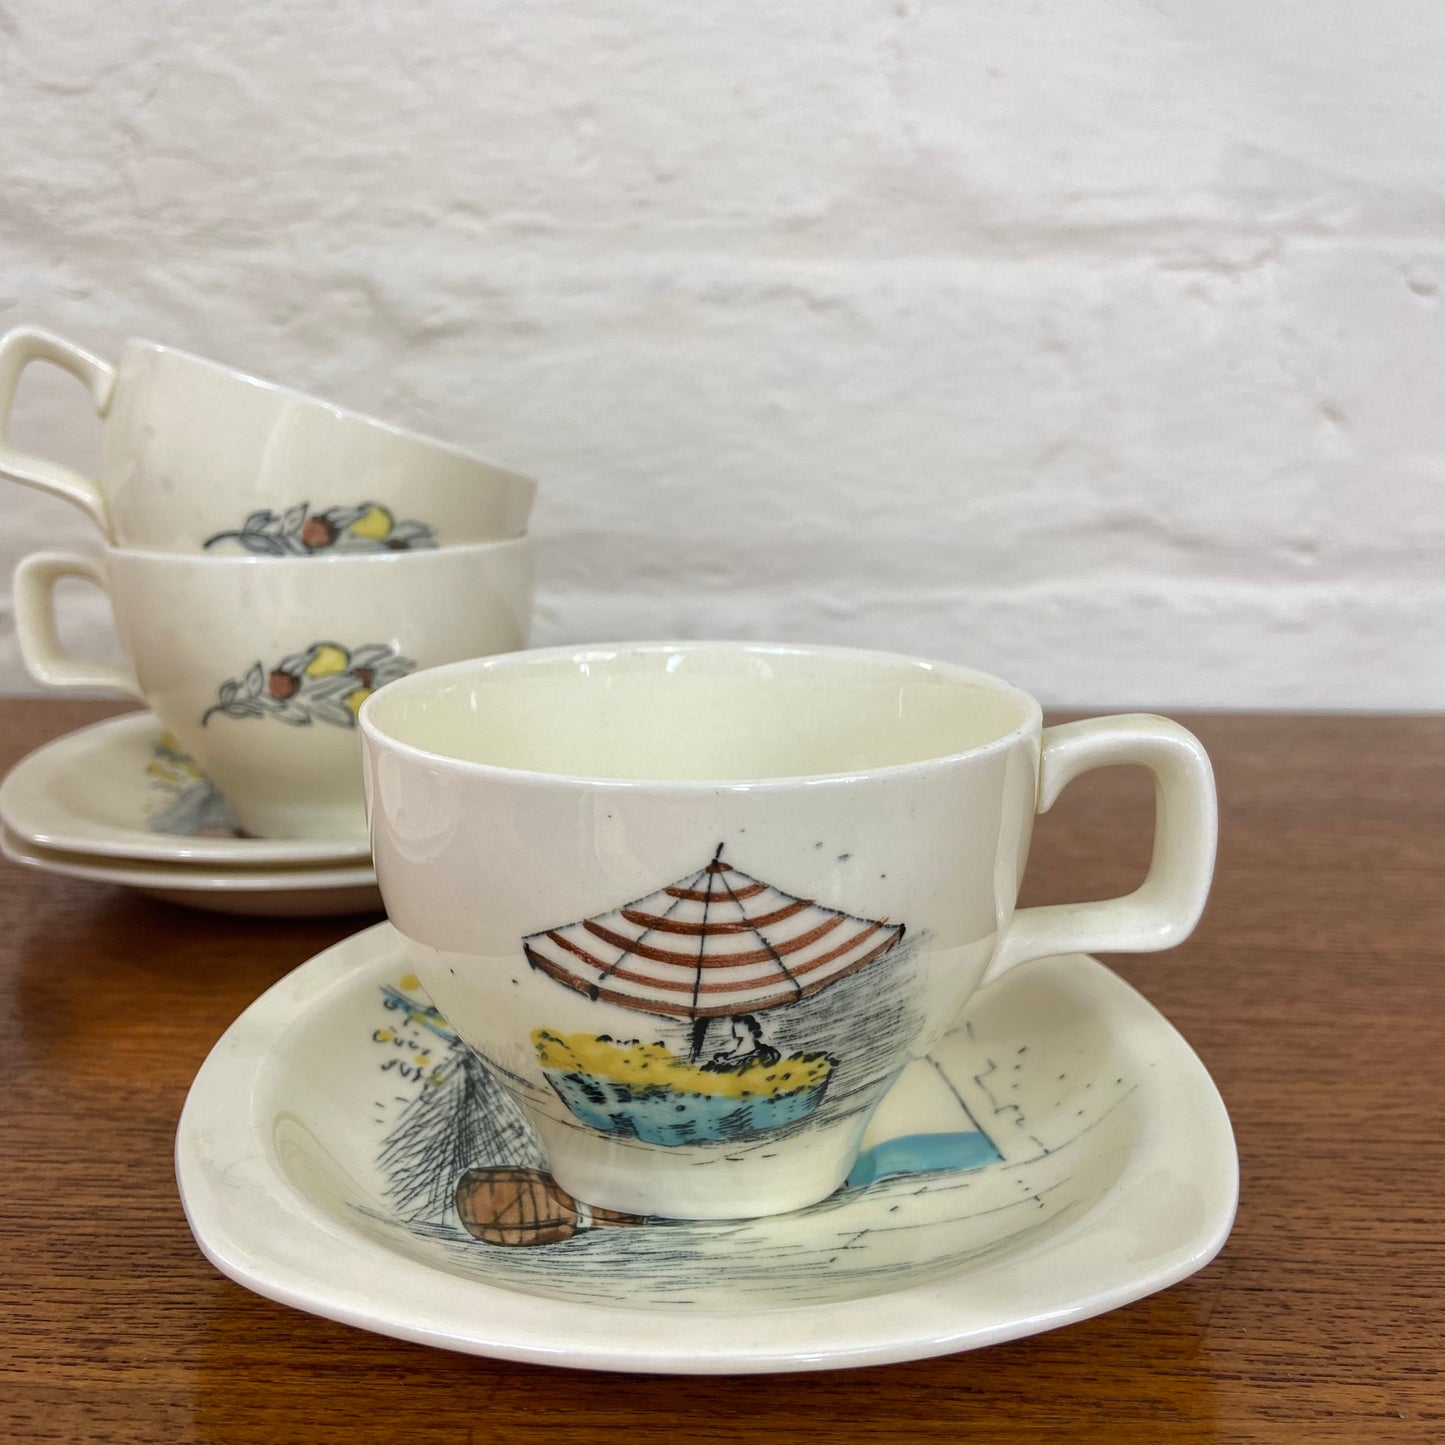 Midwinter Riviera Coffee Cups & Saucers